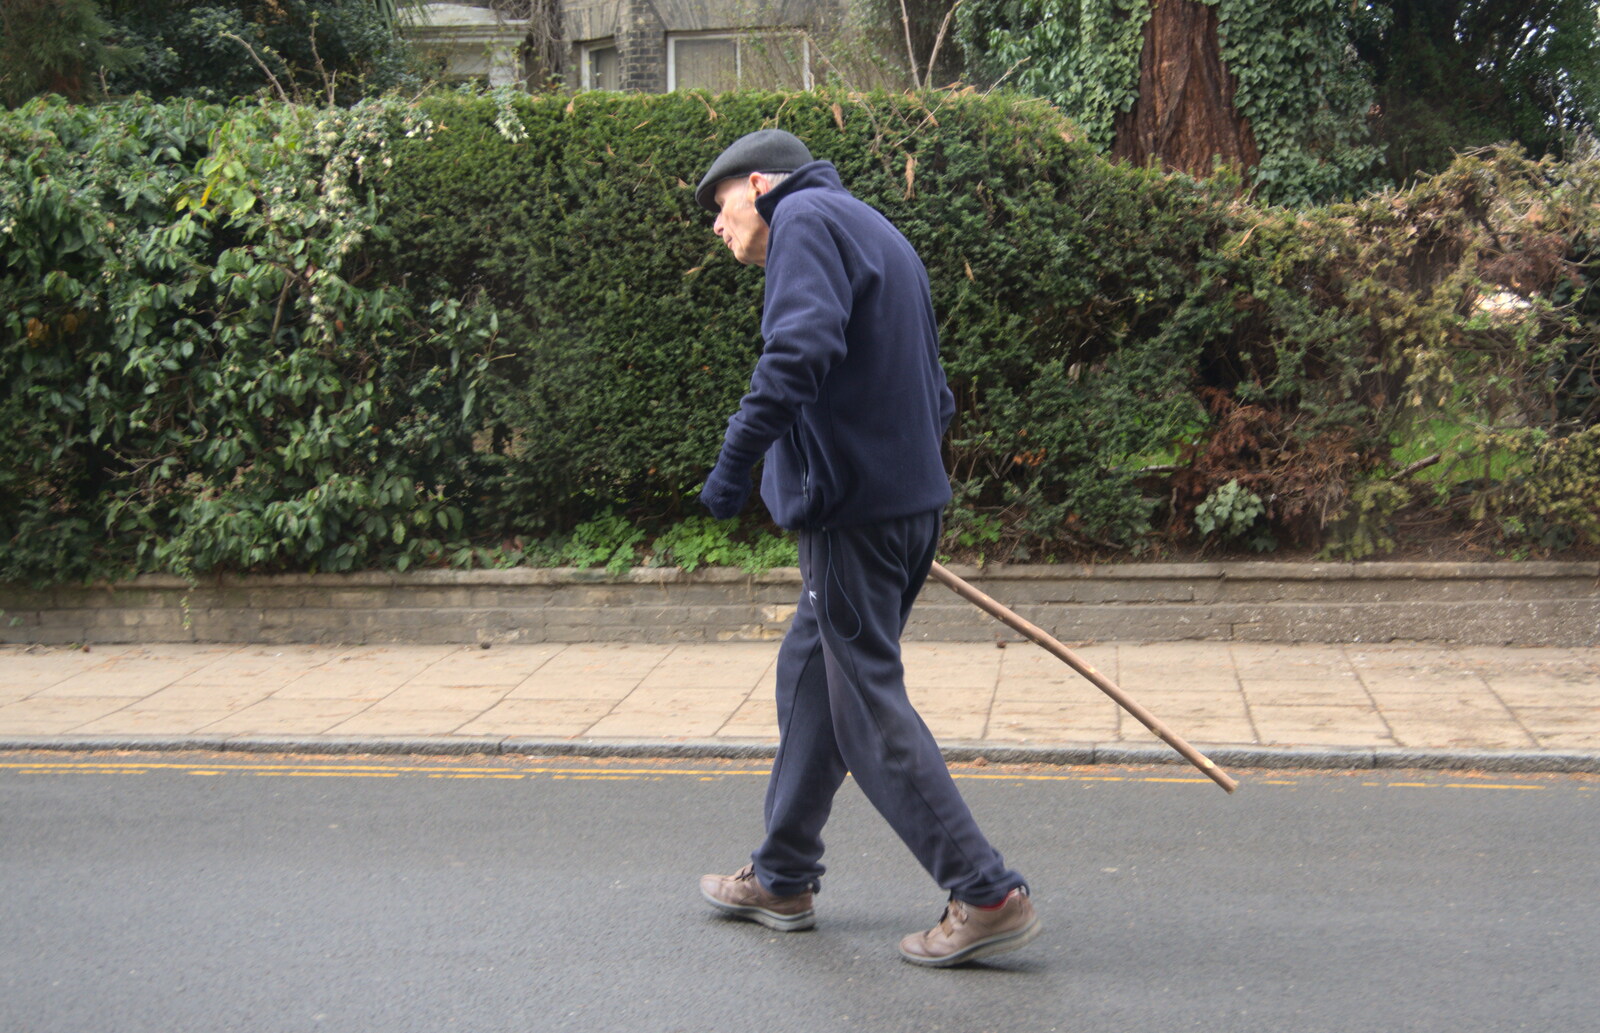 Lunch in Harleston, Norfolk - 1st March 2023: An old geezer takes forever to cross the road